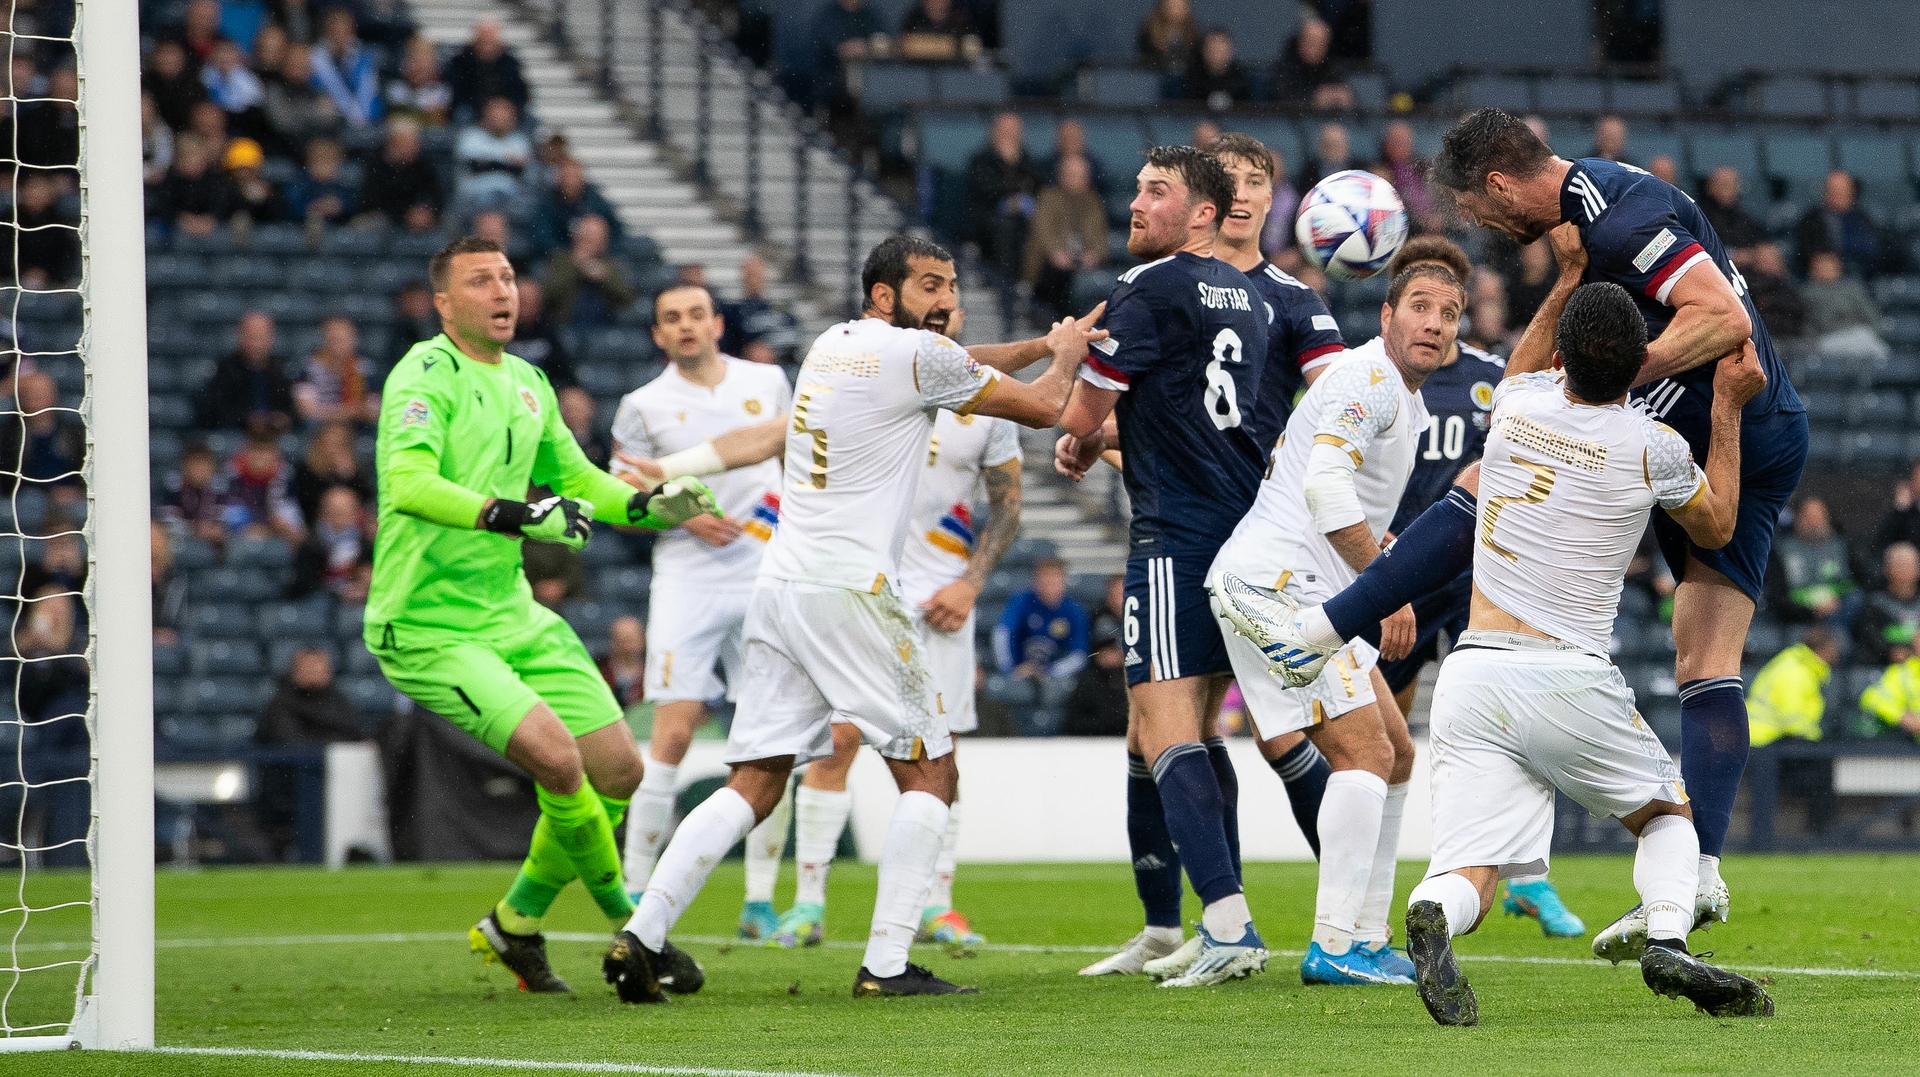 Scott McKenna heads the second goal of the night as Scotland ease to victory.